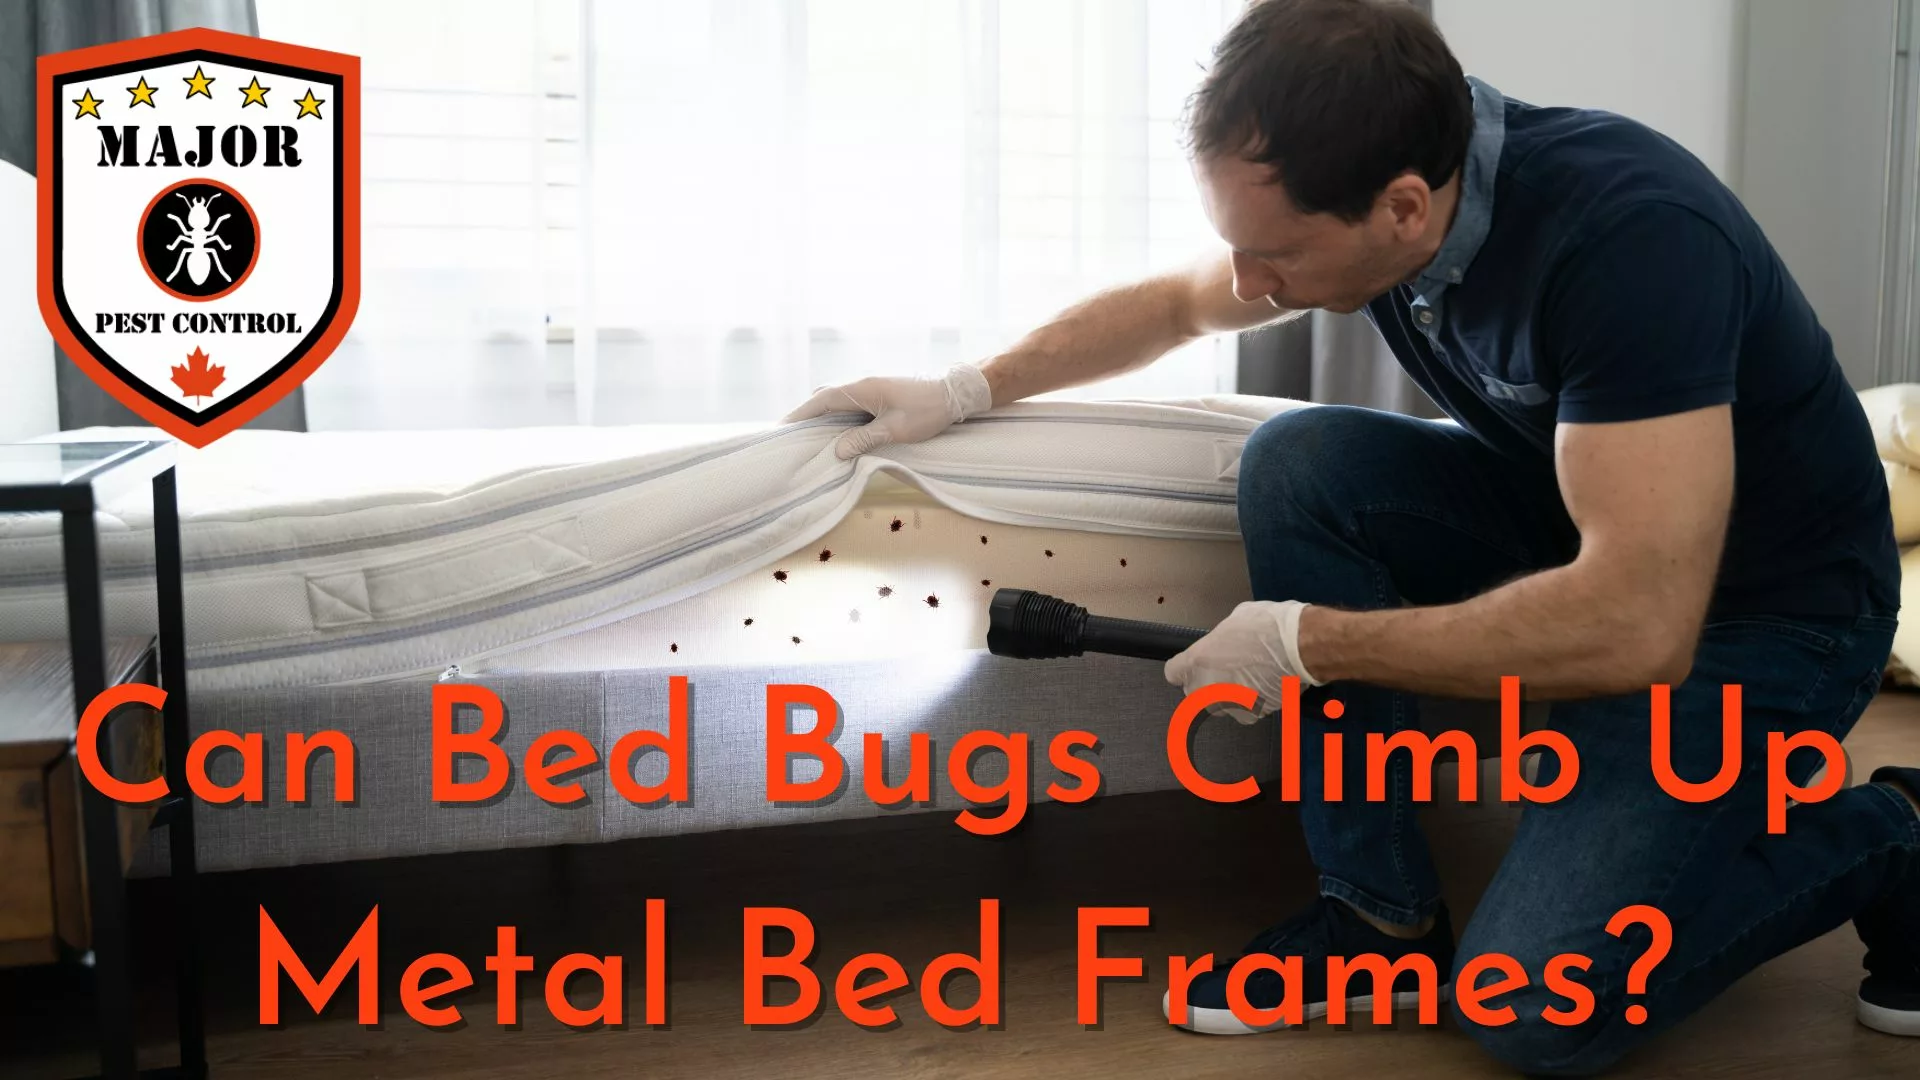 Can Bed Bugs Climb Up Metal Bed Frames? by Major Pest Control Calgary